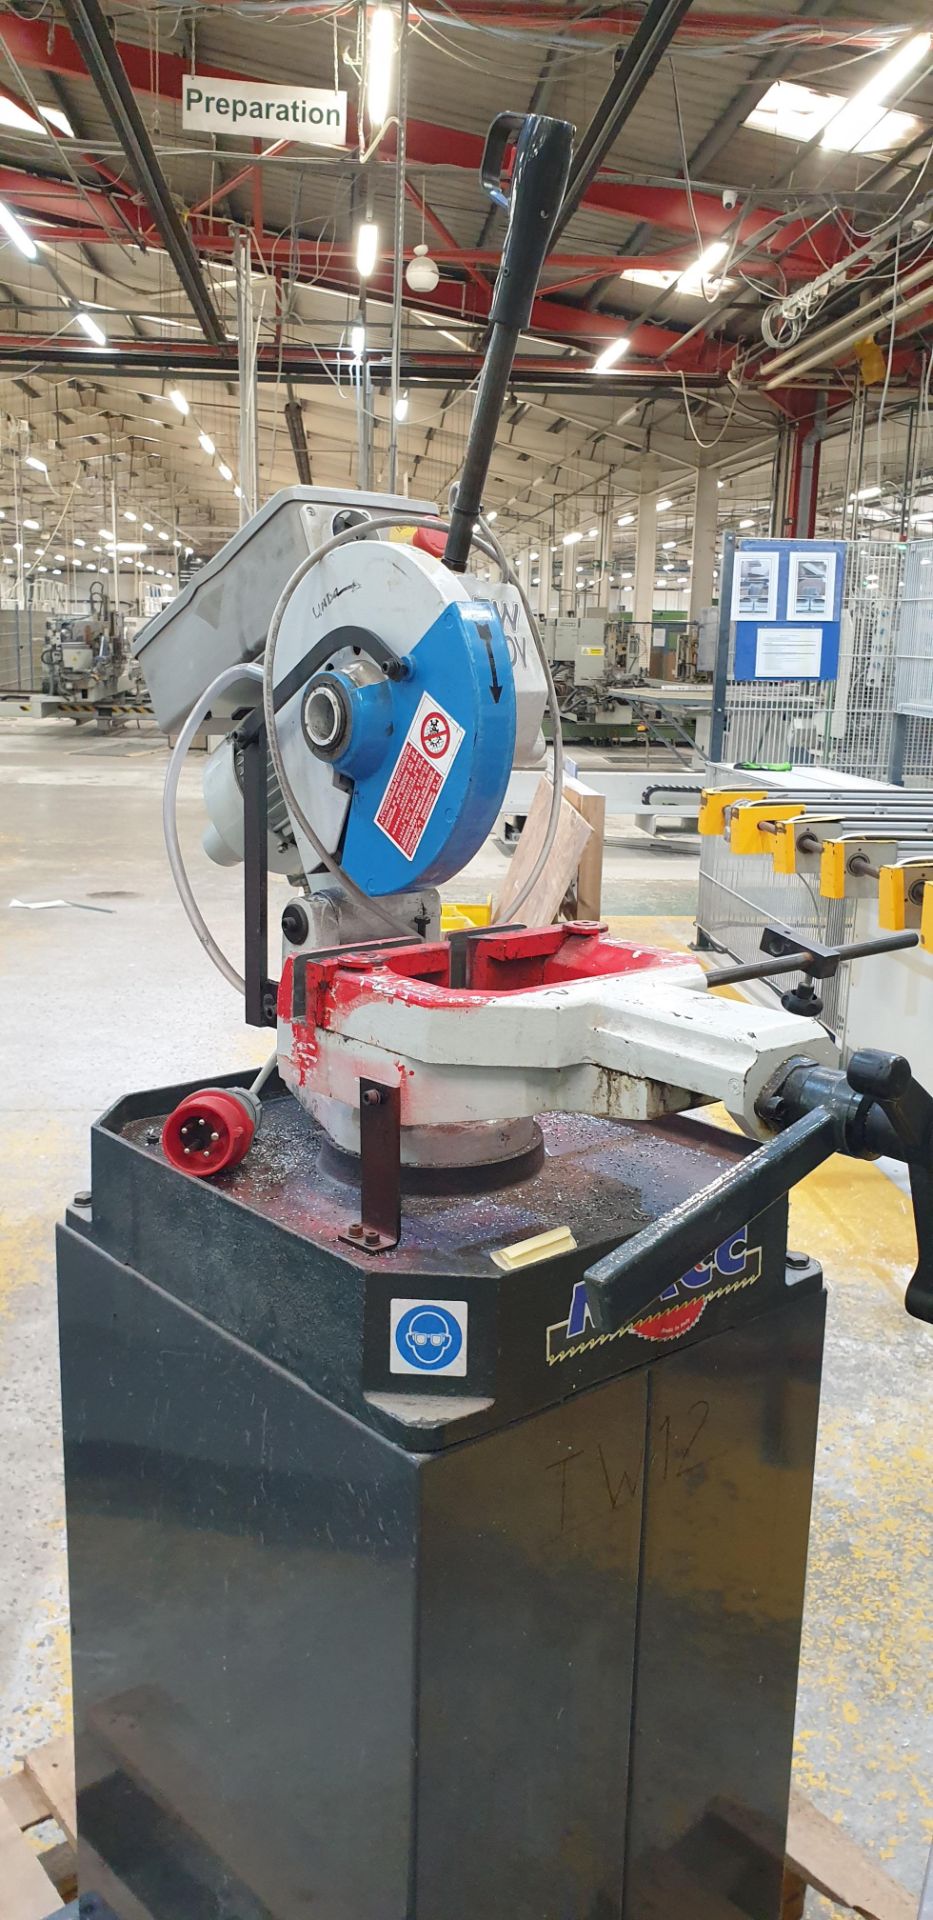 MACC, 250 DV, New Pull-Down Chp Saw, Serial Number: 125293, Year of Manufacture: 2021